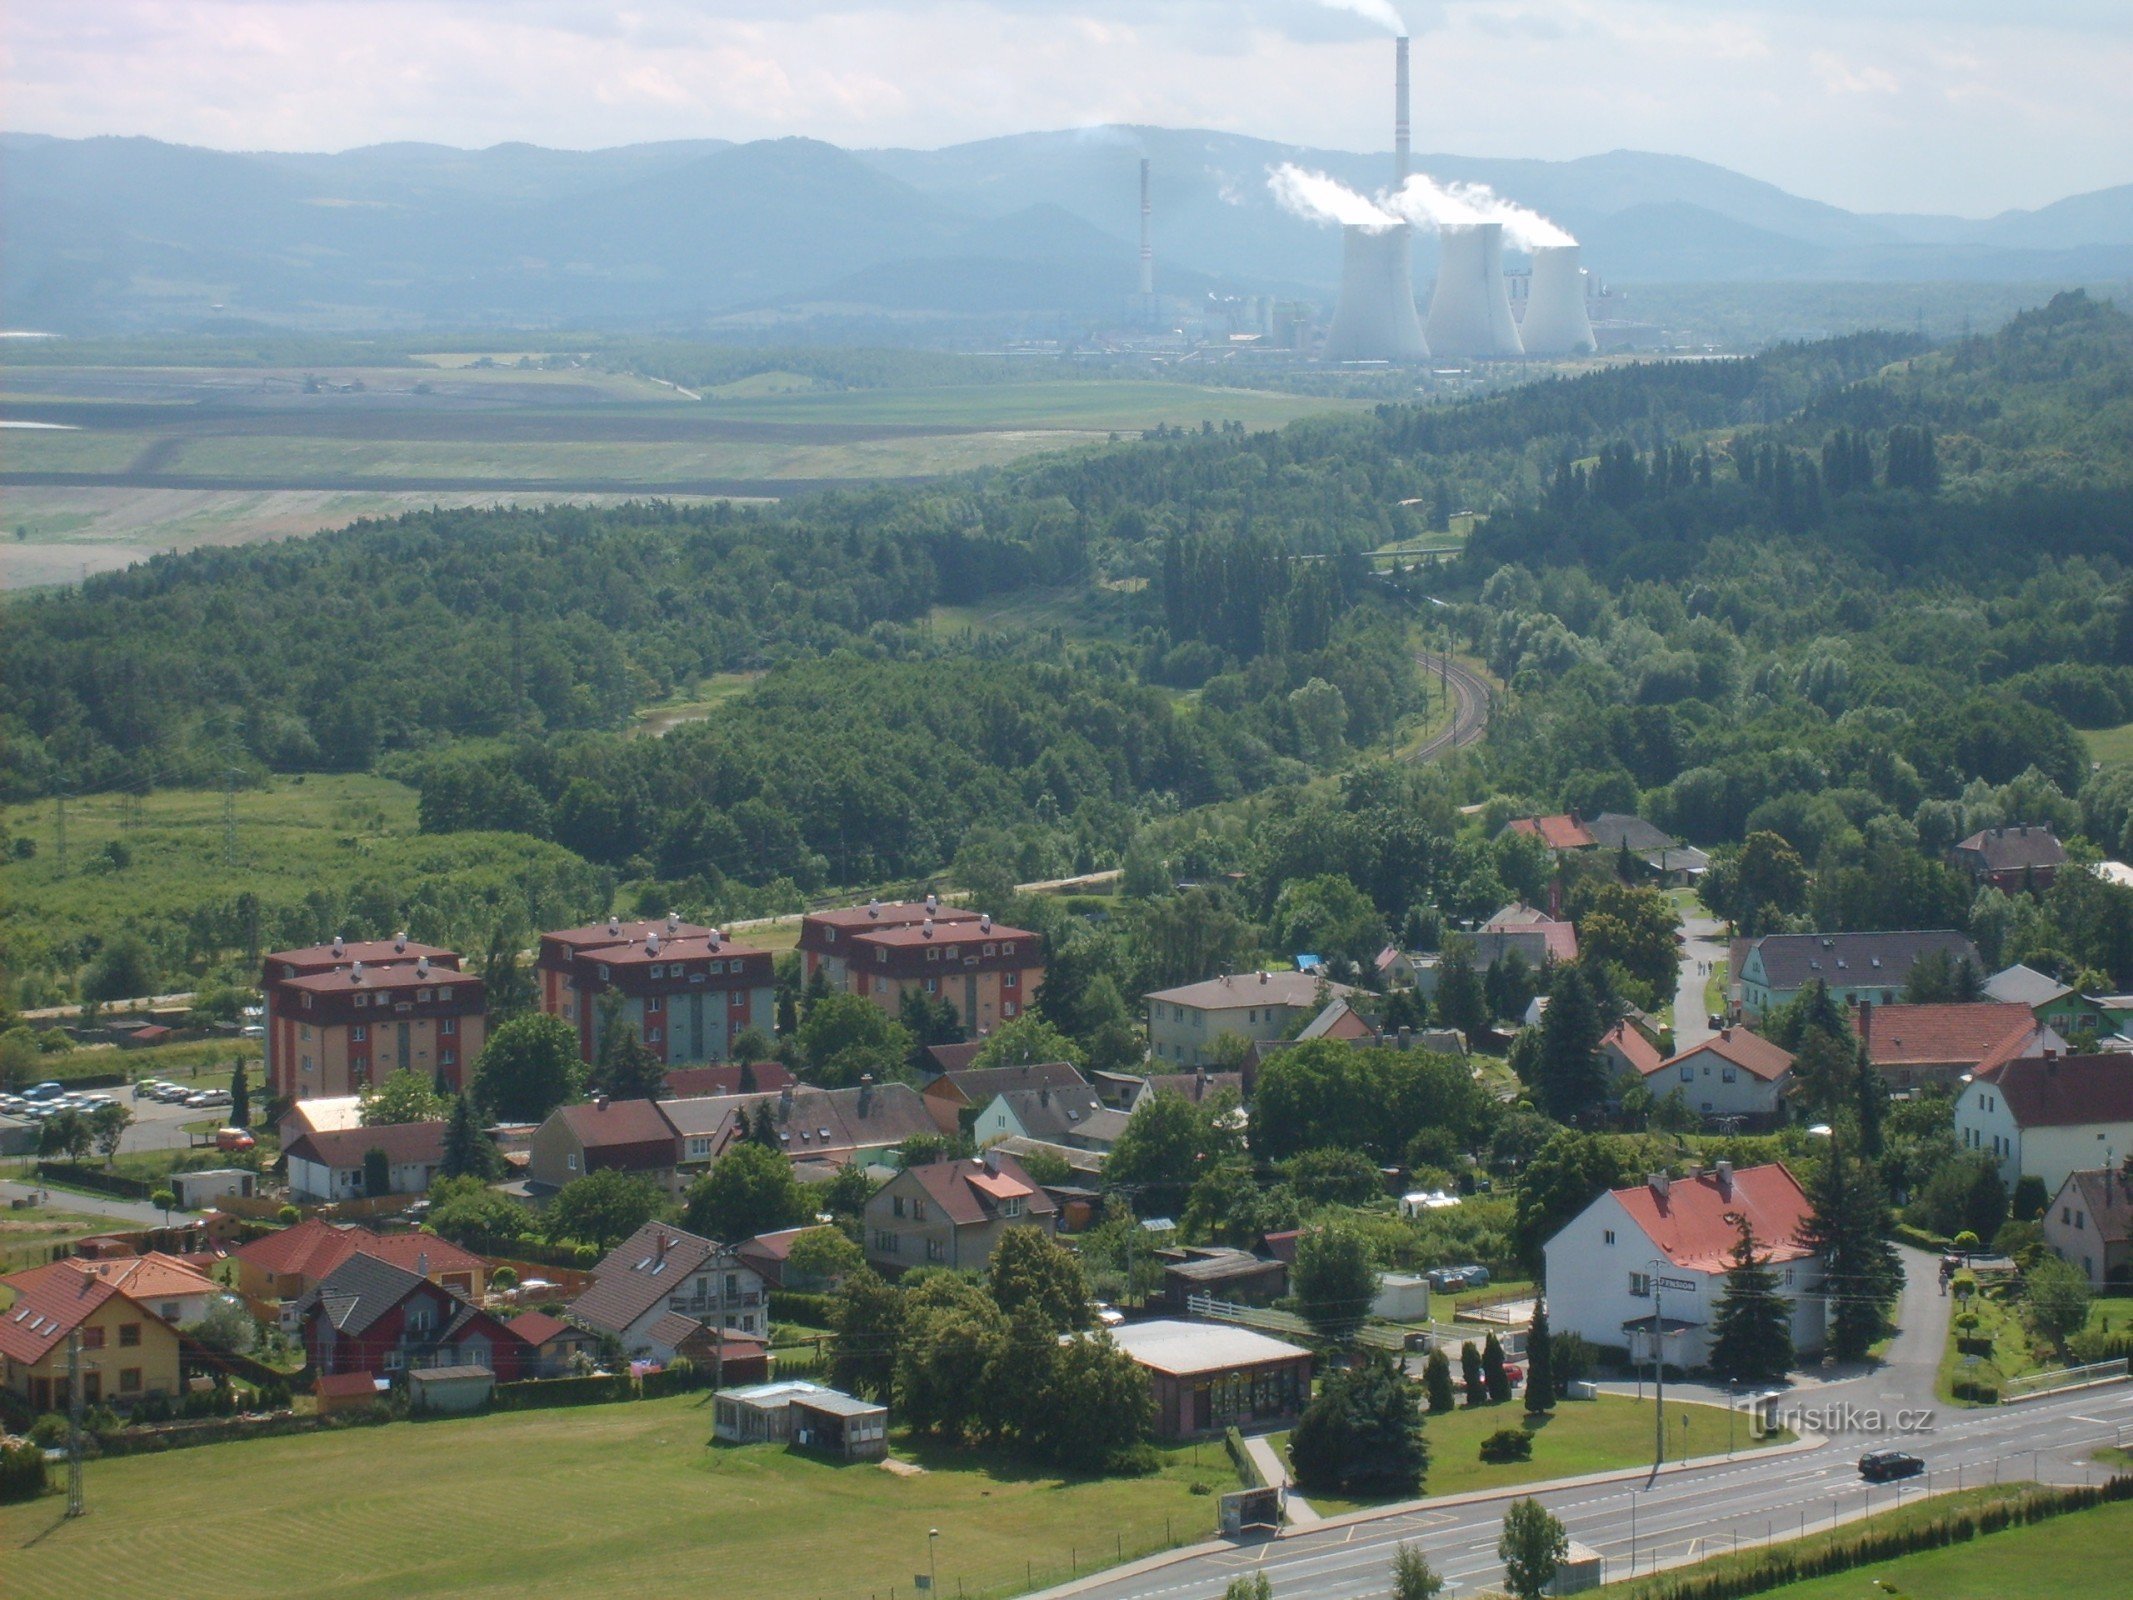 view of the Pruneřov power plant